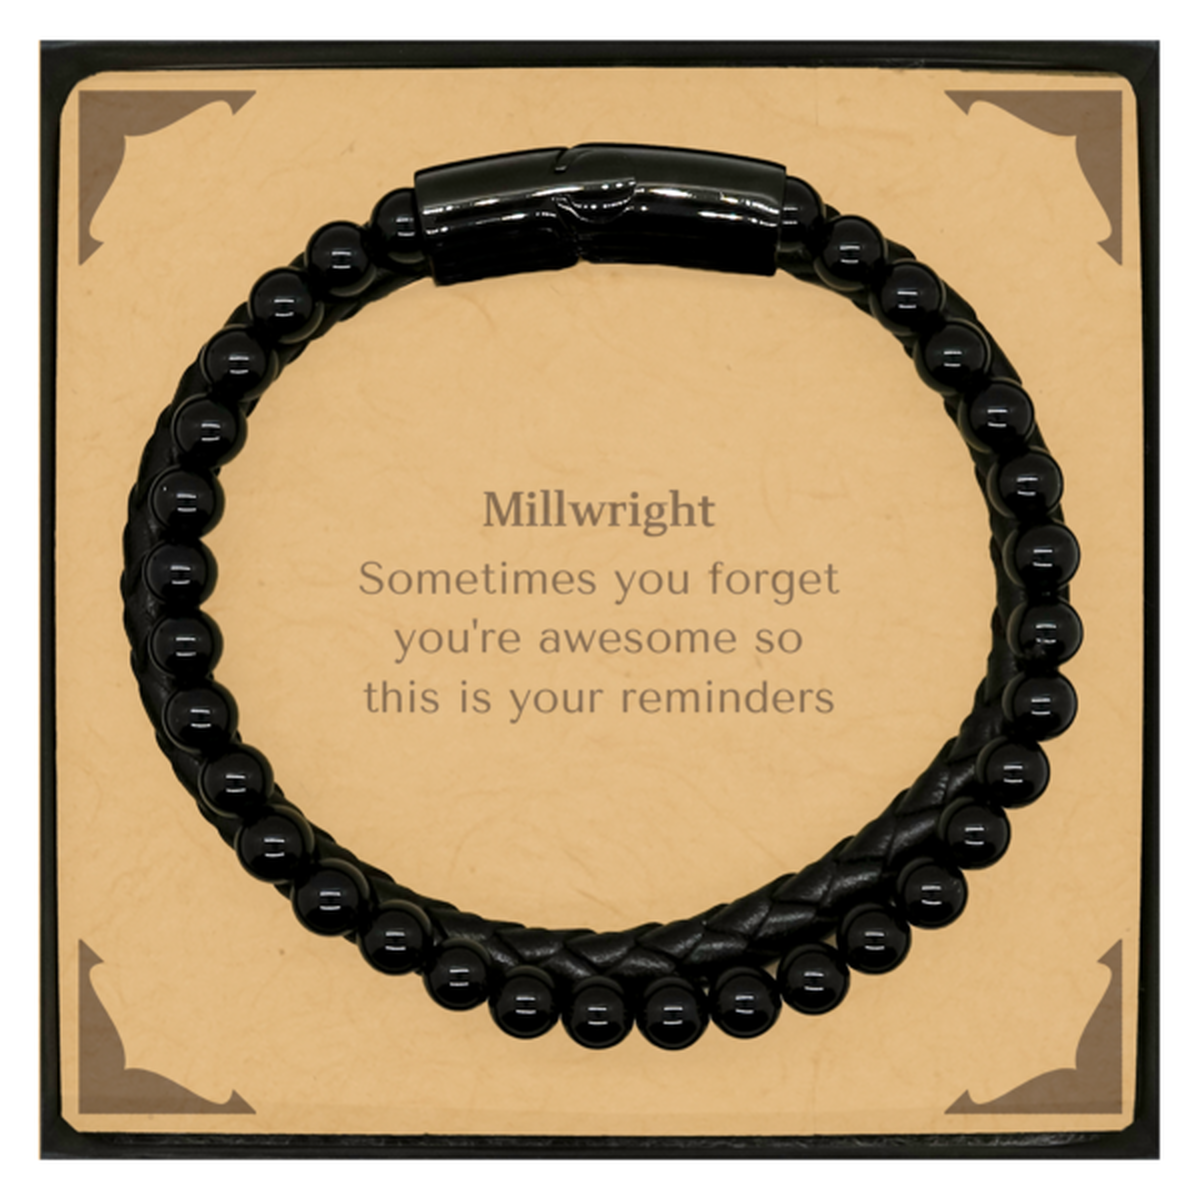 Sentimental Millwright Stone Leather Bracelets, Millwright Sometimes you forget you're awesome so this is your reminders, Graduation Christmas Birthday Gifts for Millwright, Men, Women, Coworkers